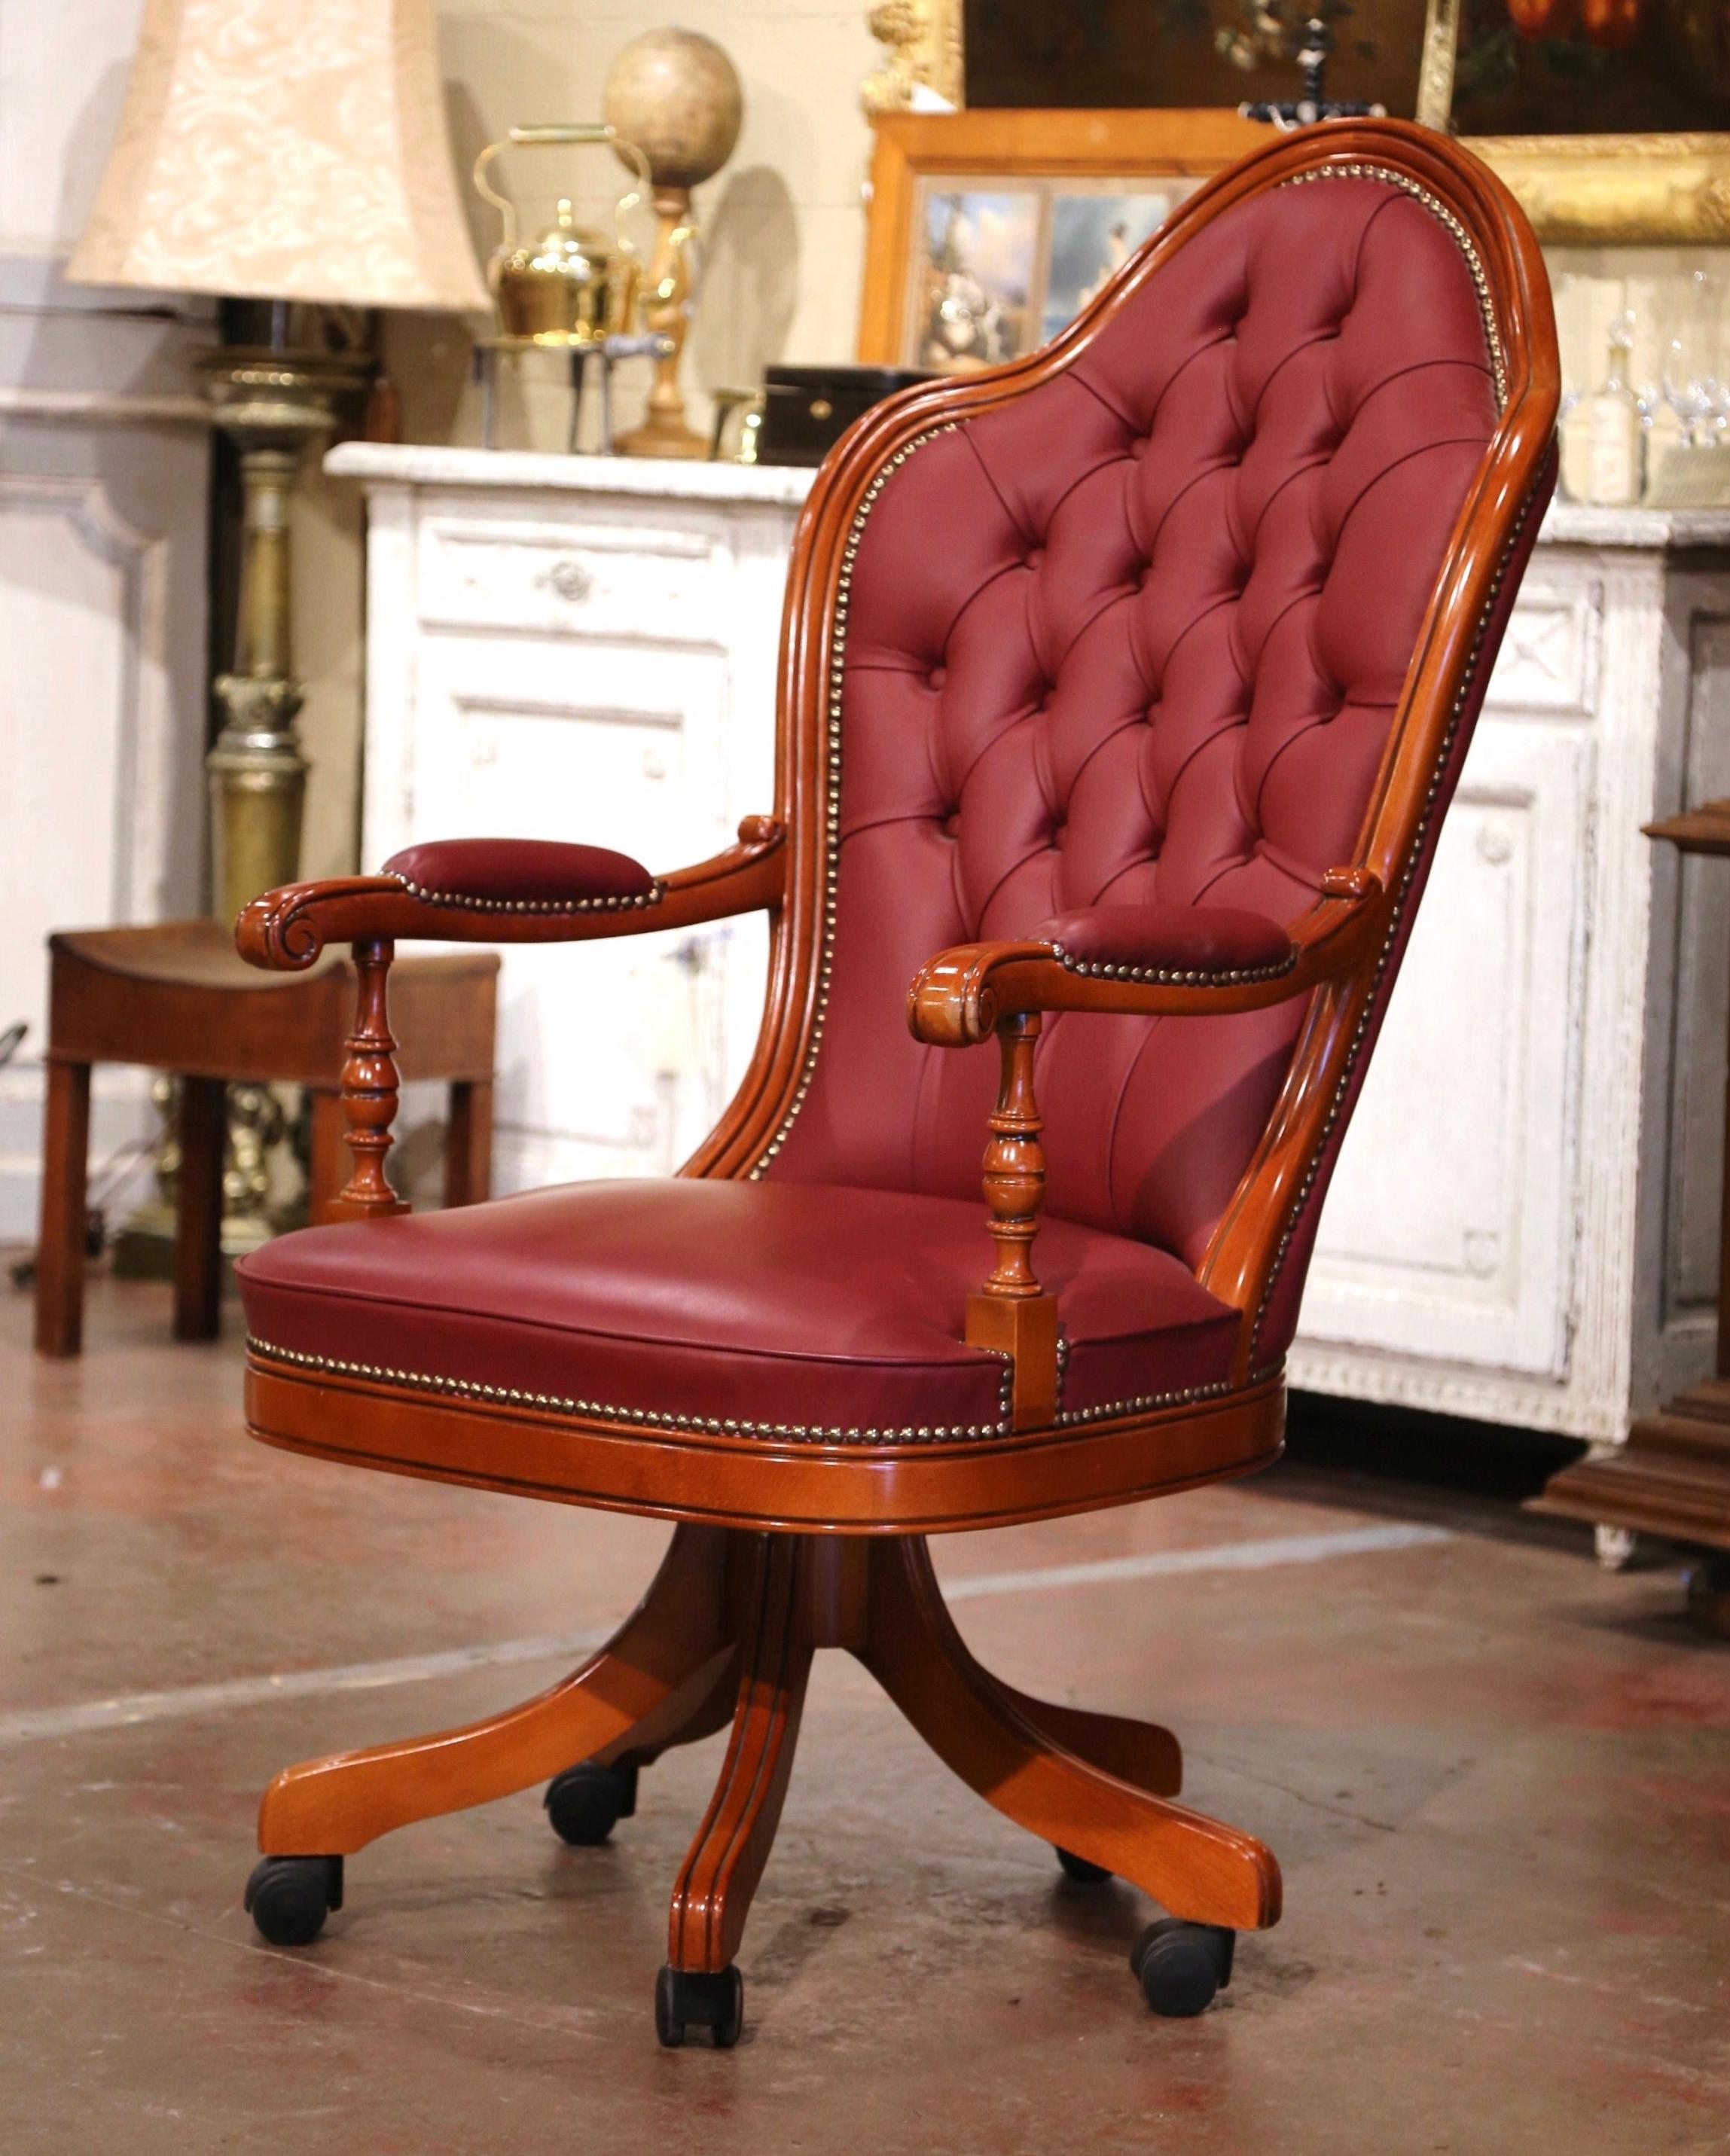 Dress a man's office or study with this elegant vintage armchair. Hand crafted in walnut by Josephine Homes in Italy circa 2000, the chair stands on a swivel base with wooden legs ending in gilt metal casters. The tall fruit wood chair with arched